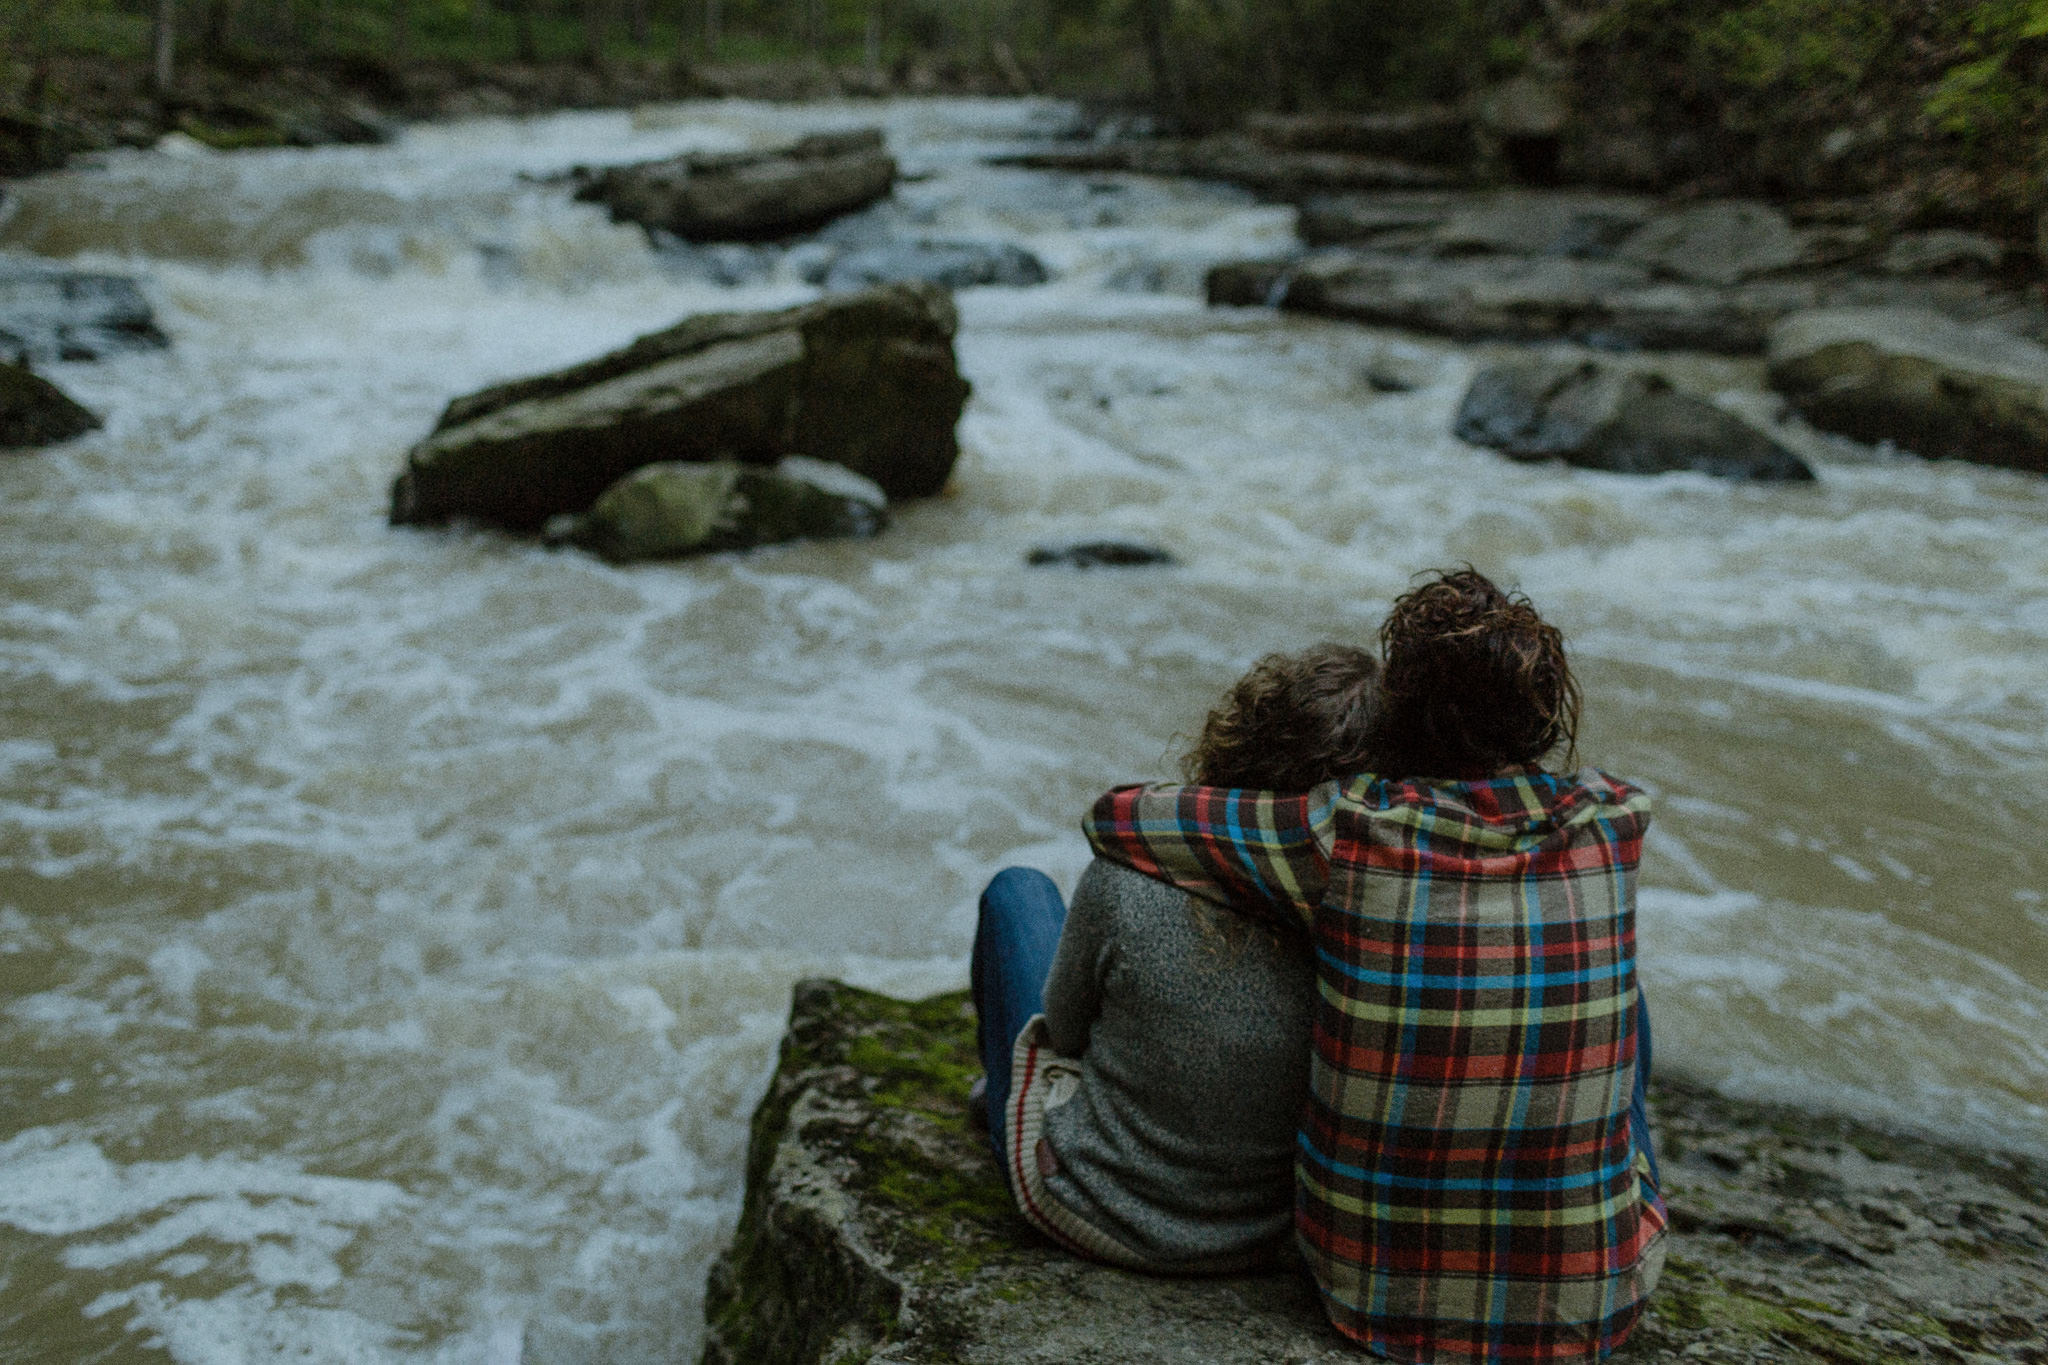 alternative rock couple sitting side by side on a mossy rock watching the water rapidly flow by